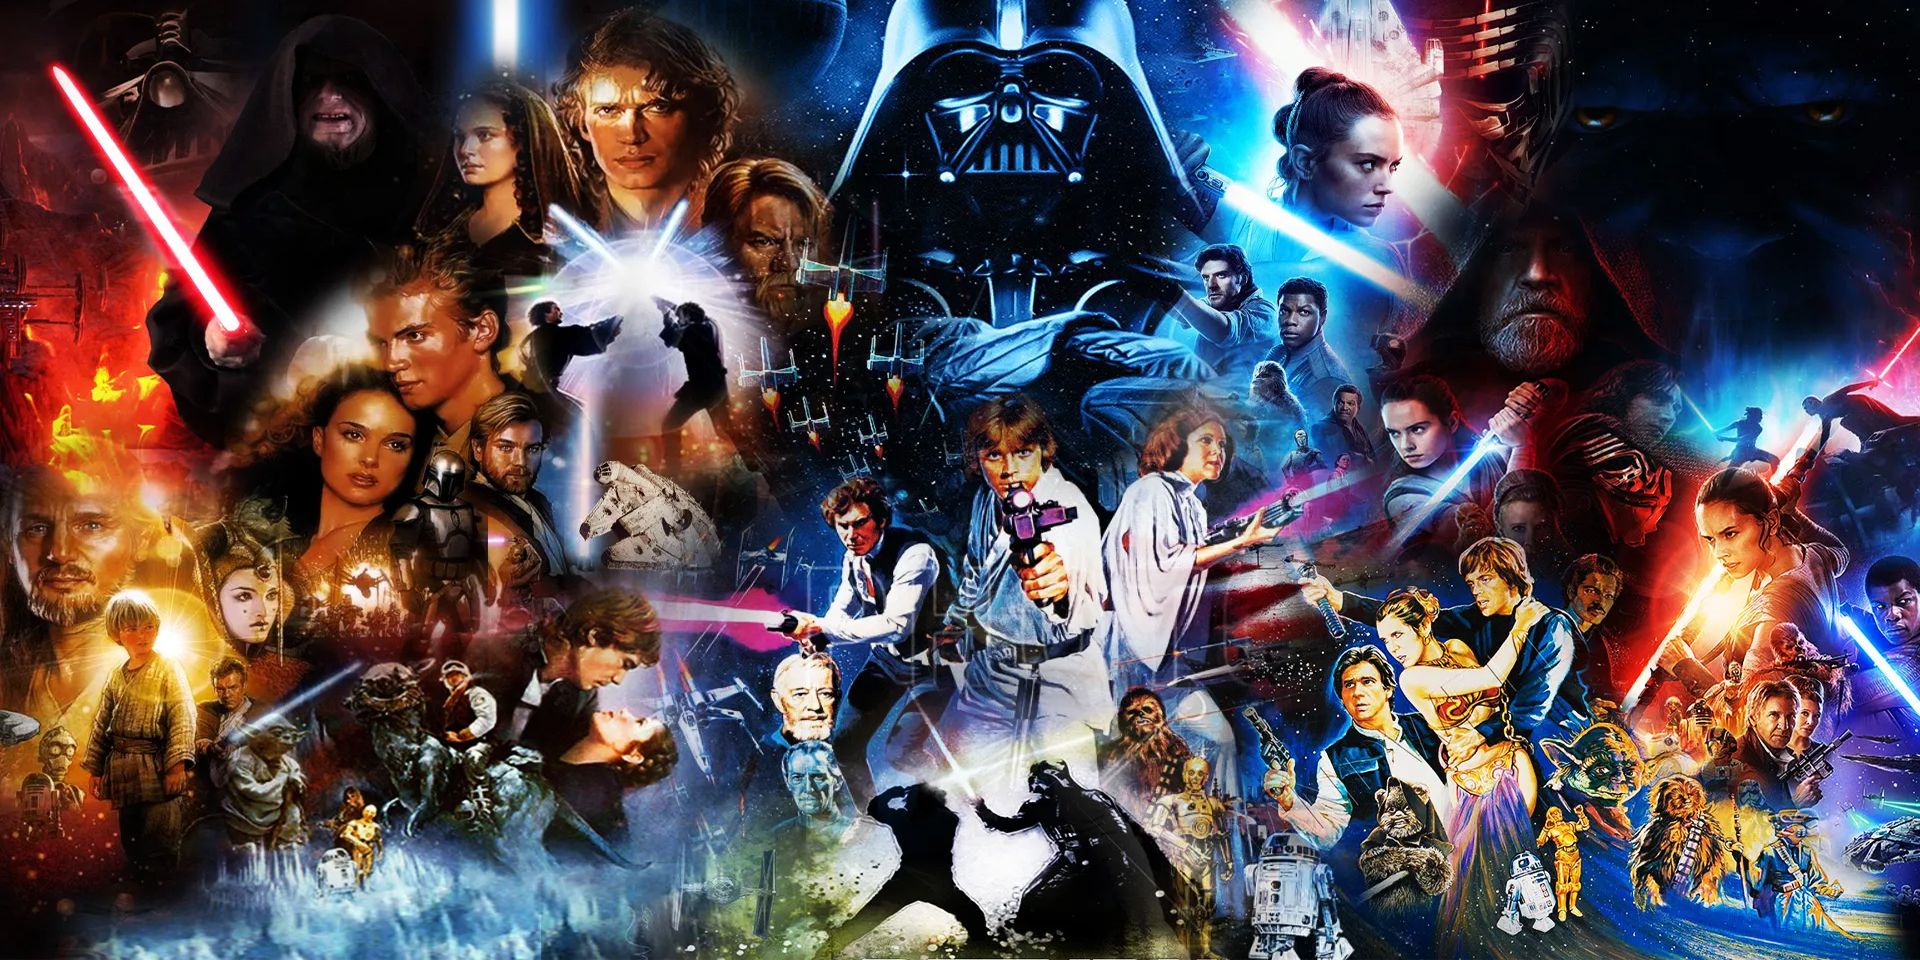 Images from the nine main Star Wars movies